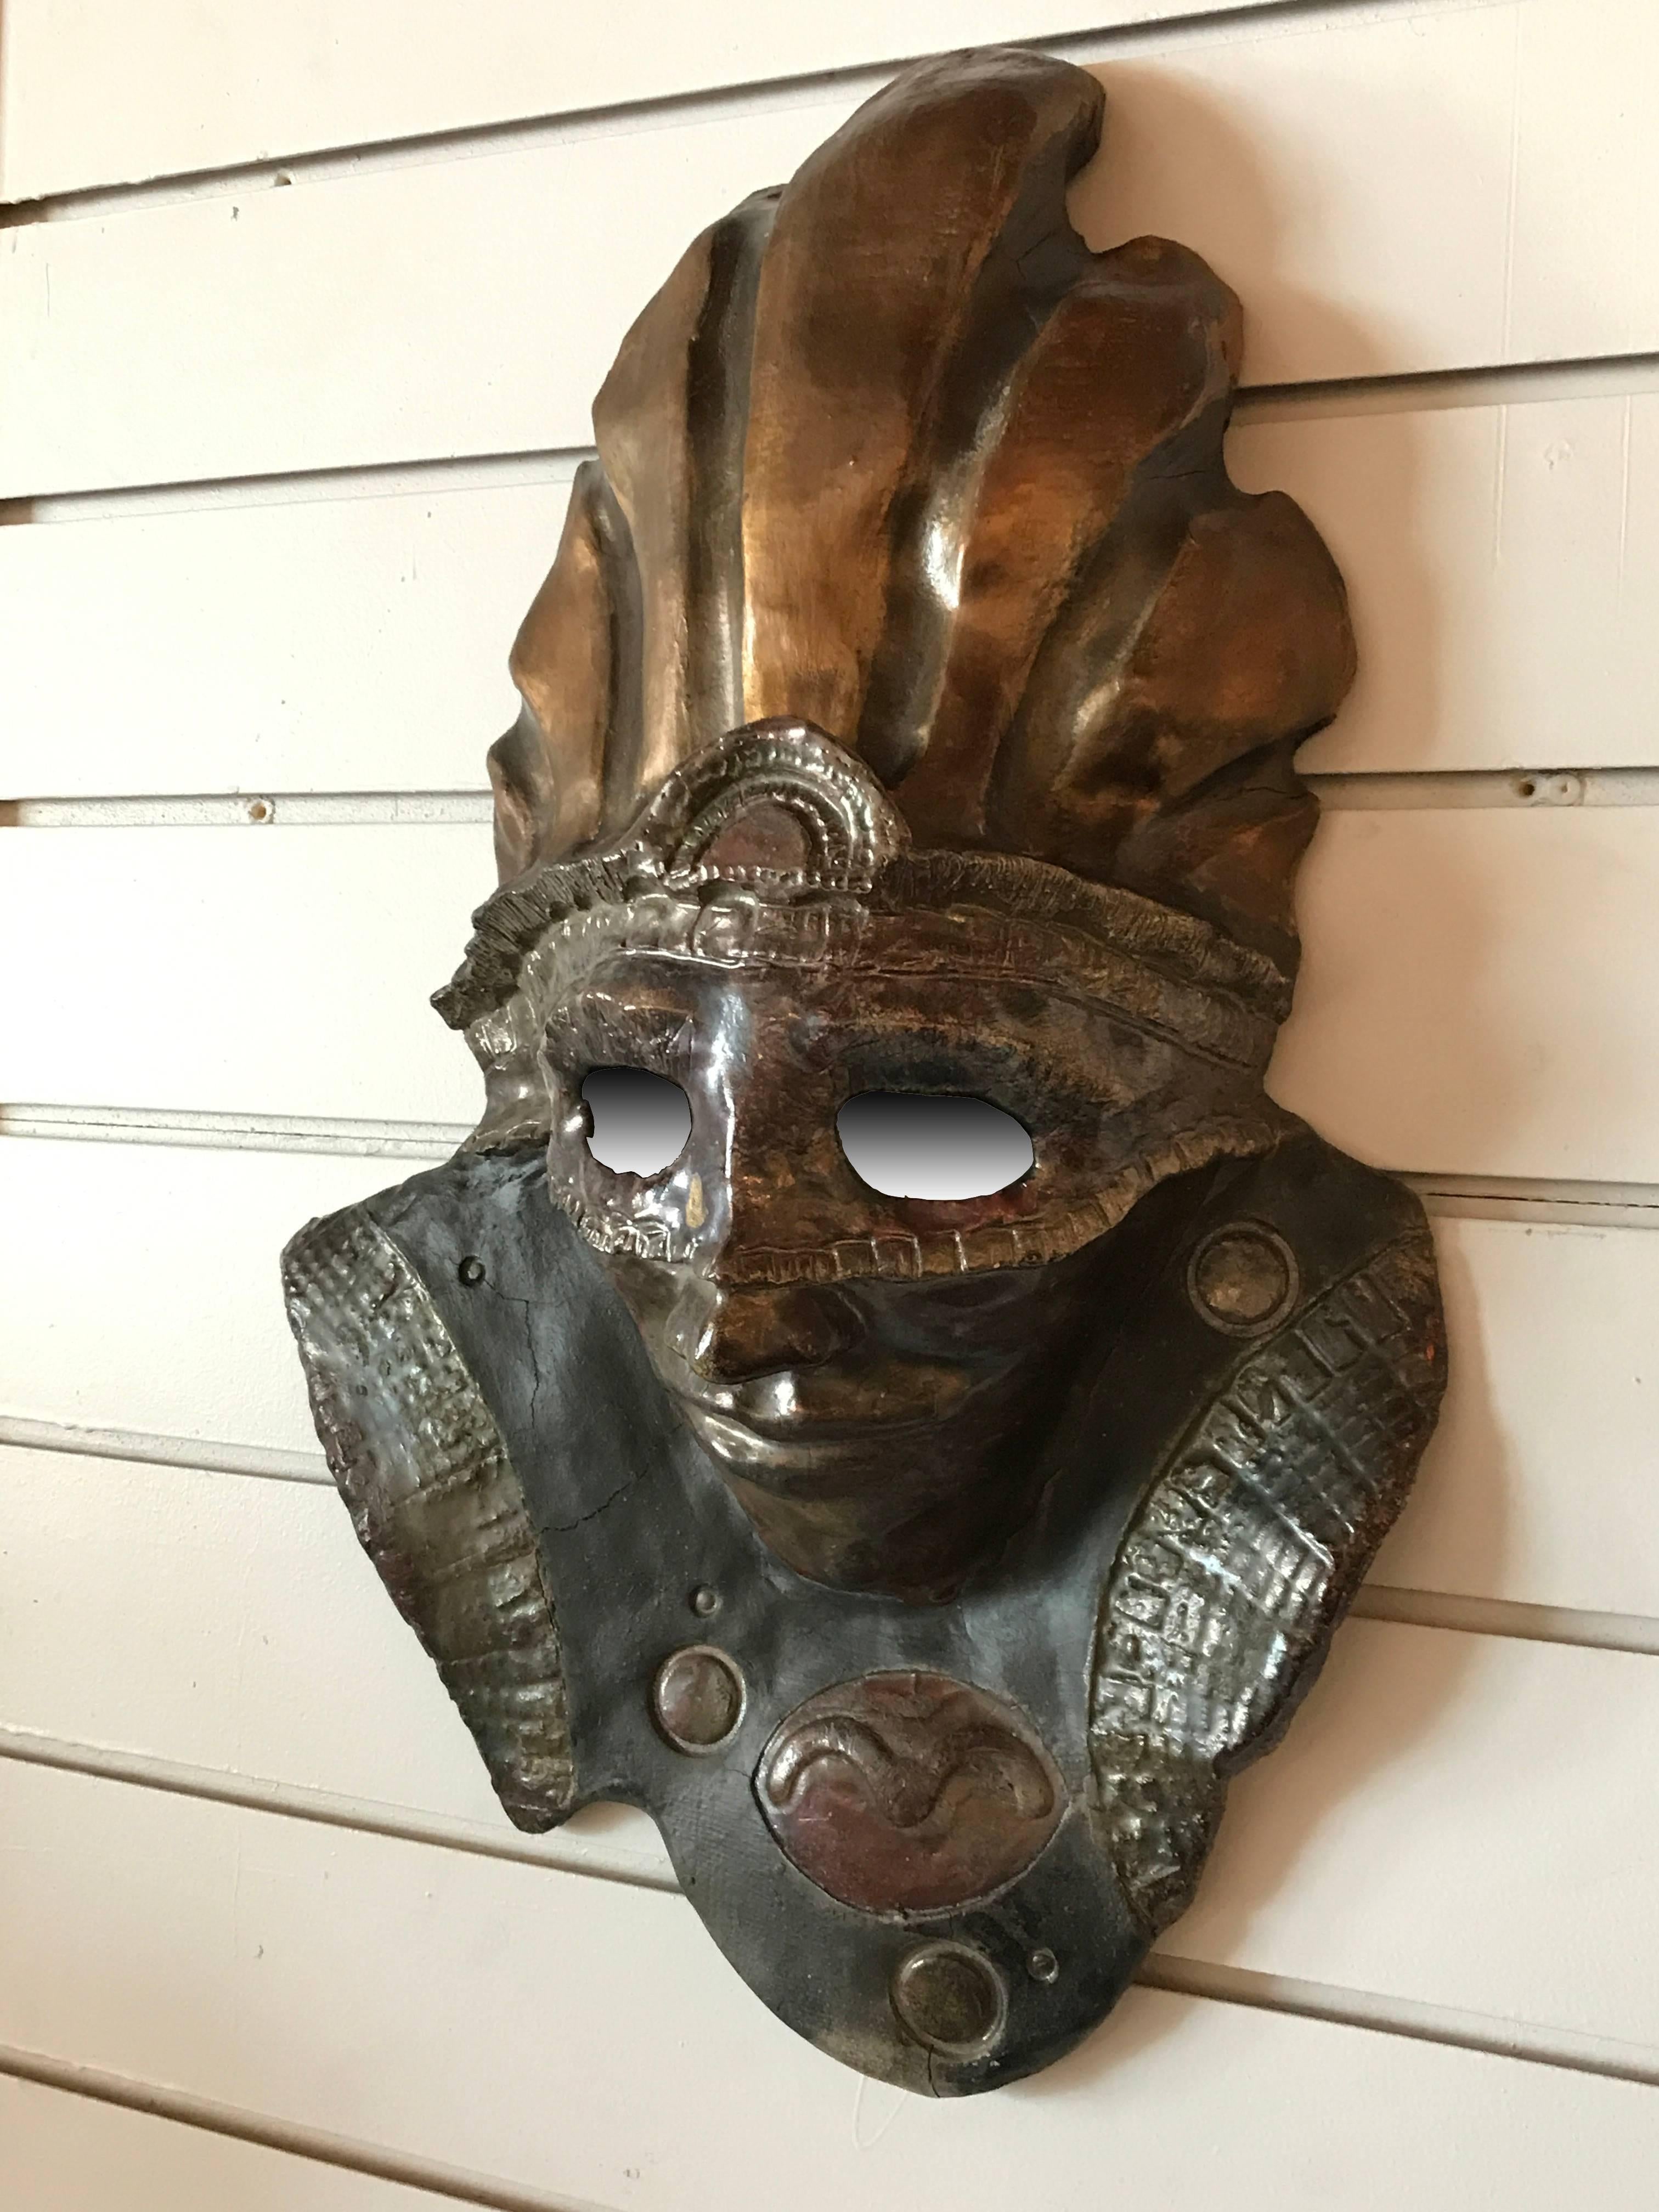 Raku style ceramic mask wall art of a warrior in a headdress.

Rakuware is Japanese hand-modeled pottery that is fired at a low temperature and rapidly cooled and typically used to make tea bowls. The technique became popular among American